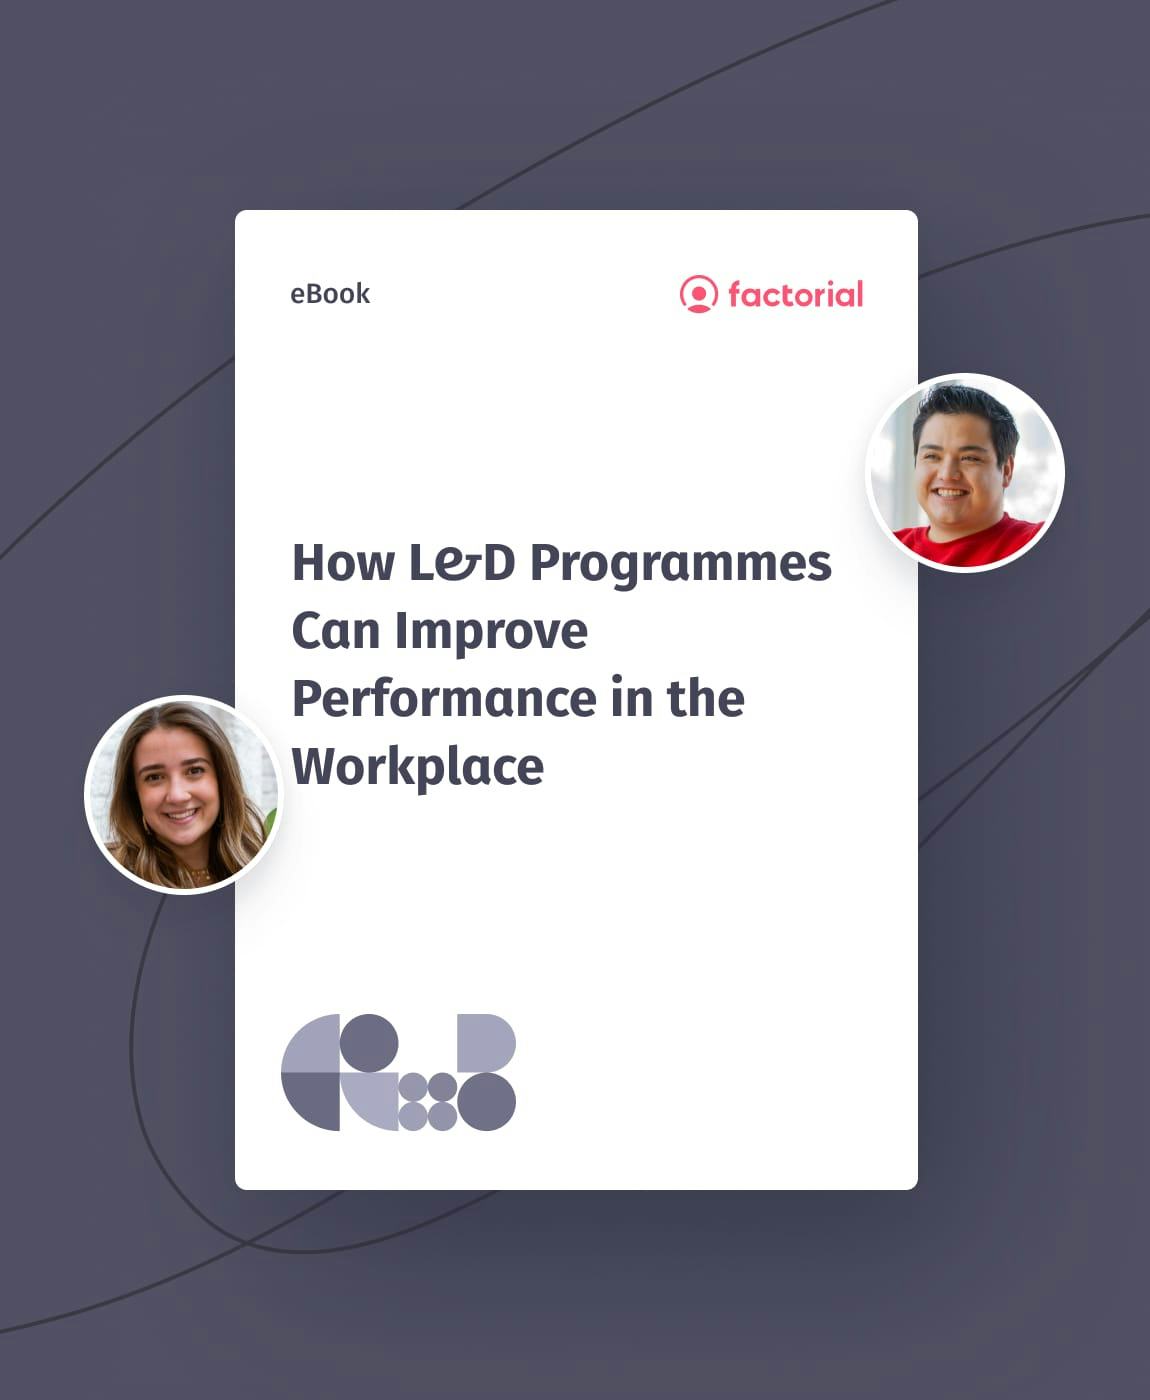 How L&D Programmes Can Improve Performance in the Workplace